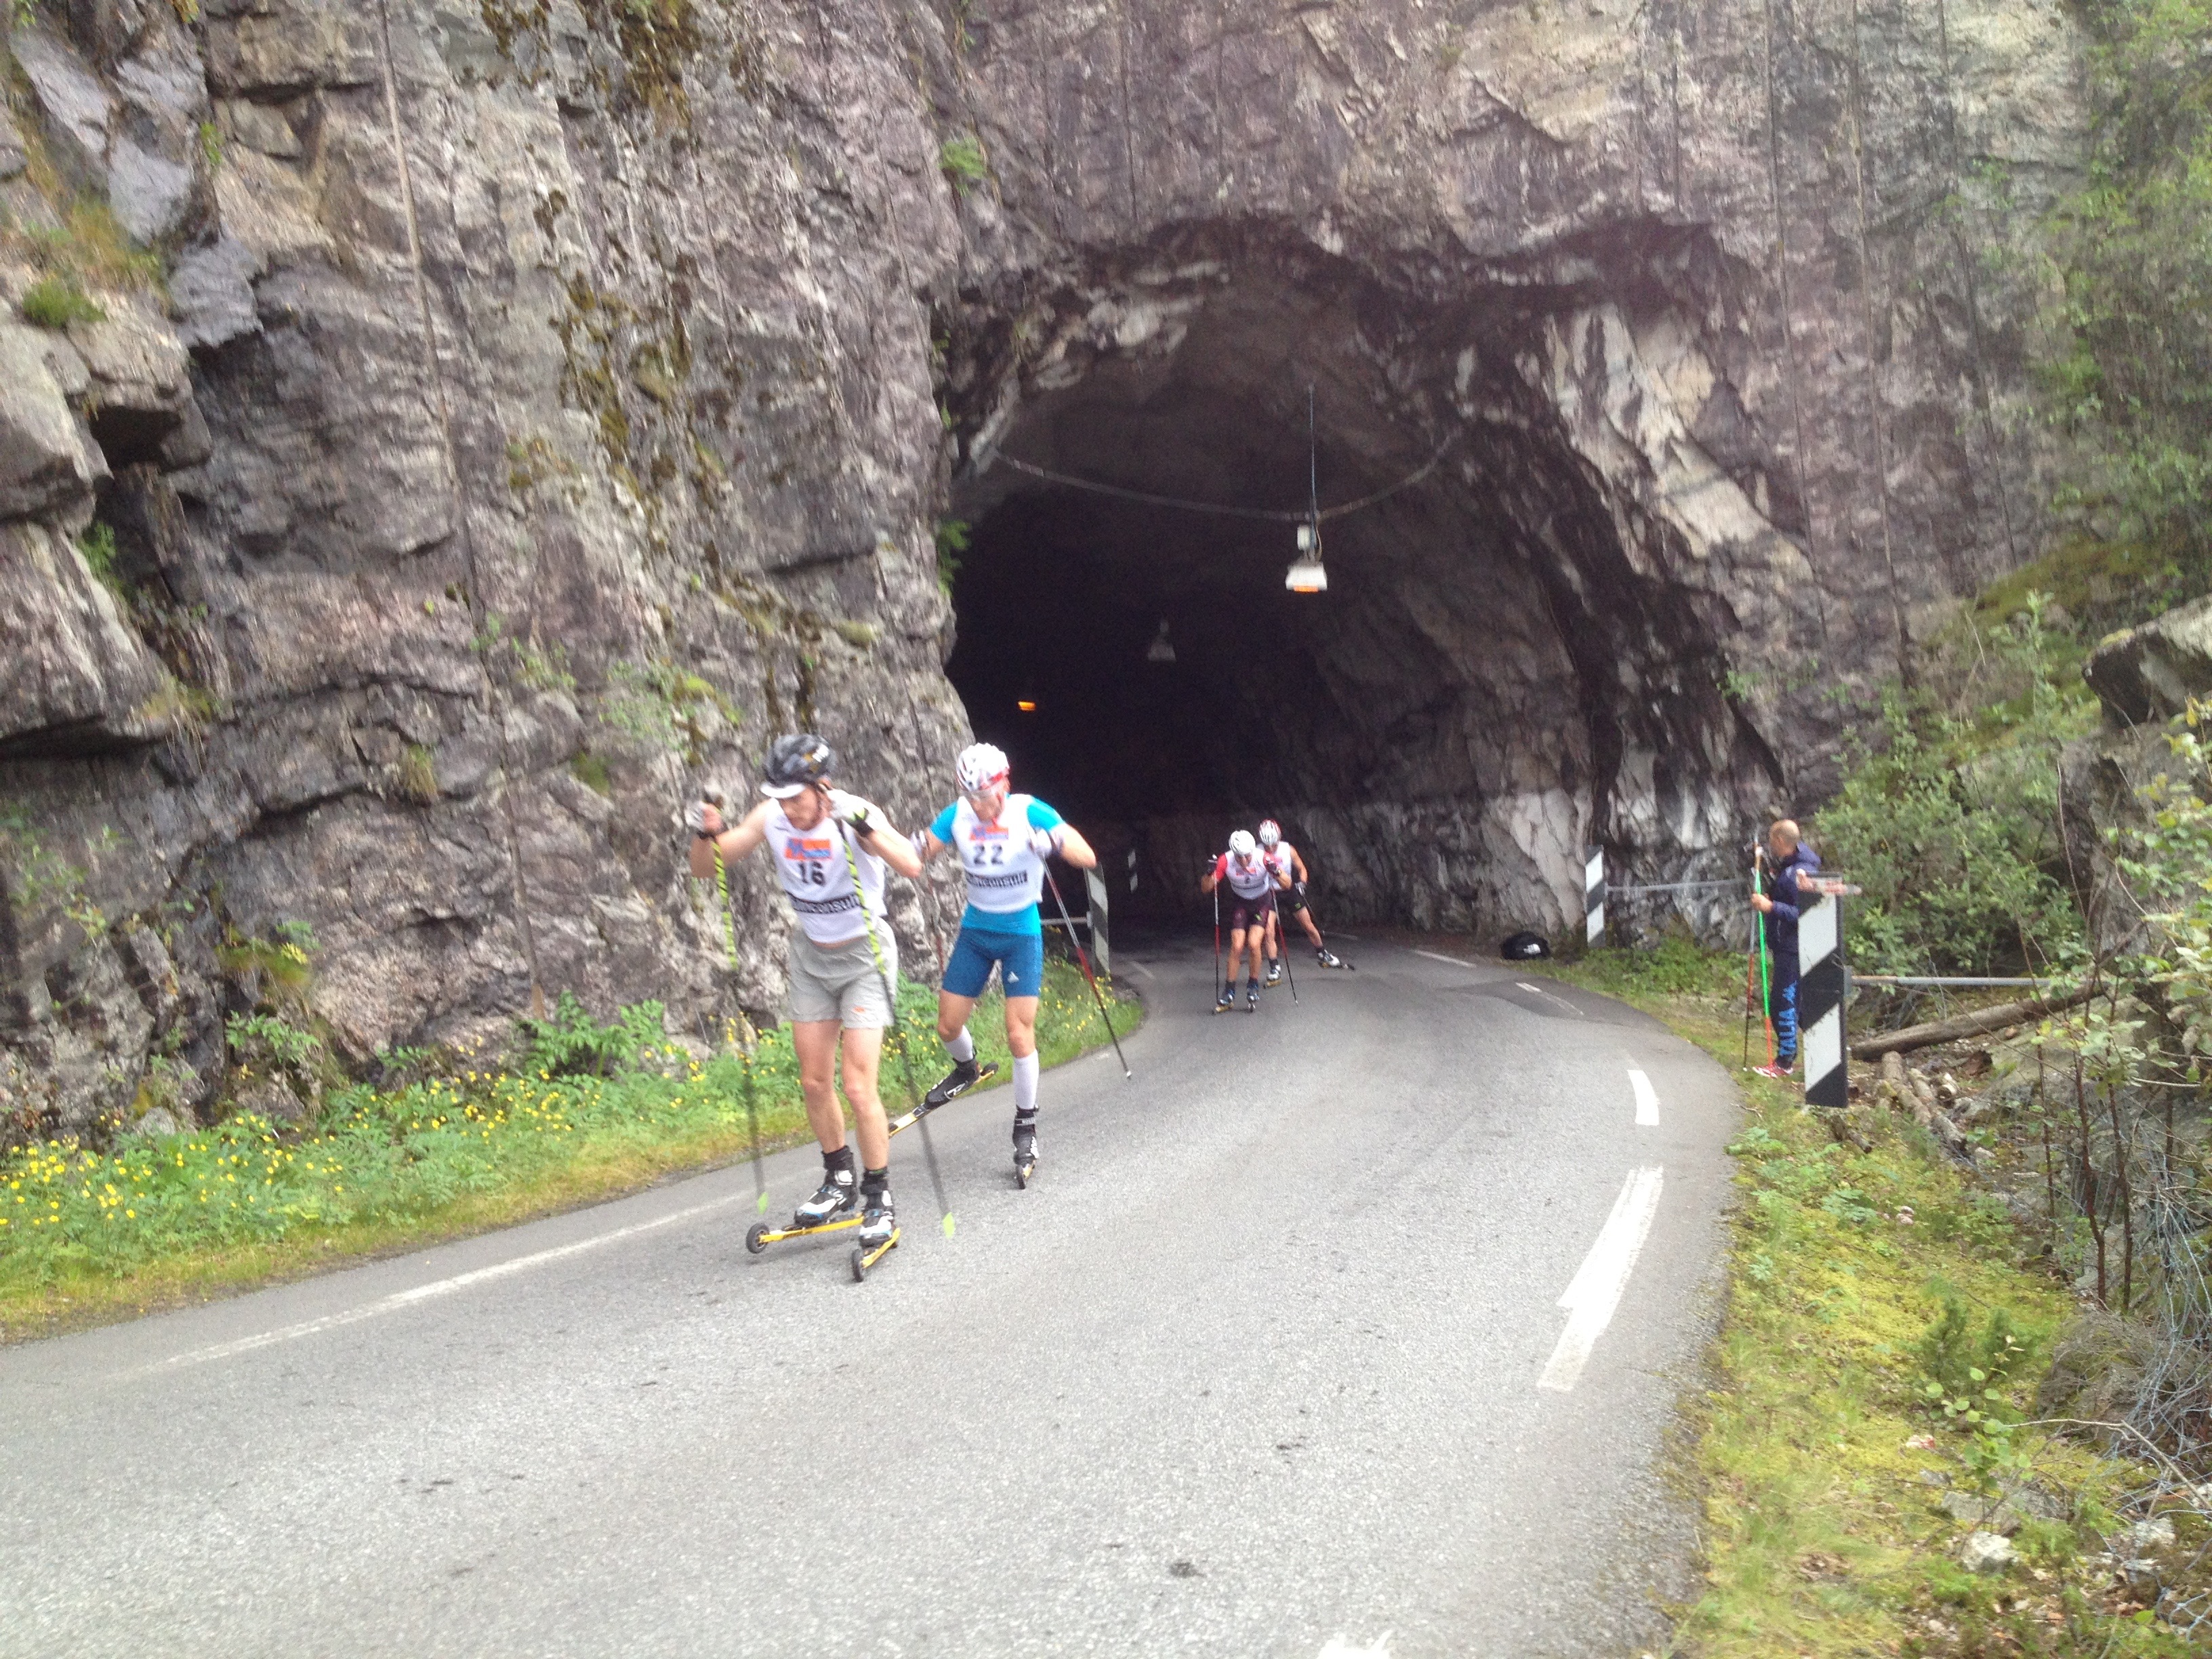 Heikkinen leading Legkov, Manificat, and Tarjei Bø out of a kilometer-long tunnel early in the race. (Photo: Matthias Ahrens)